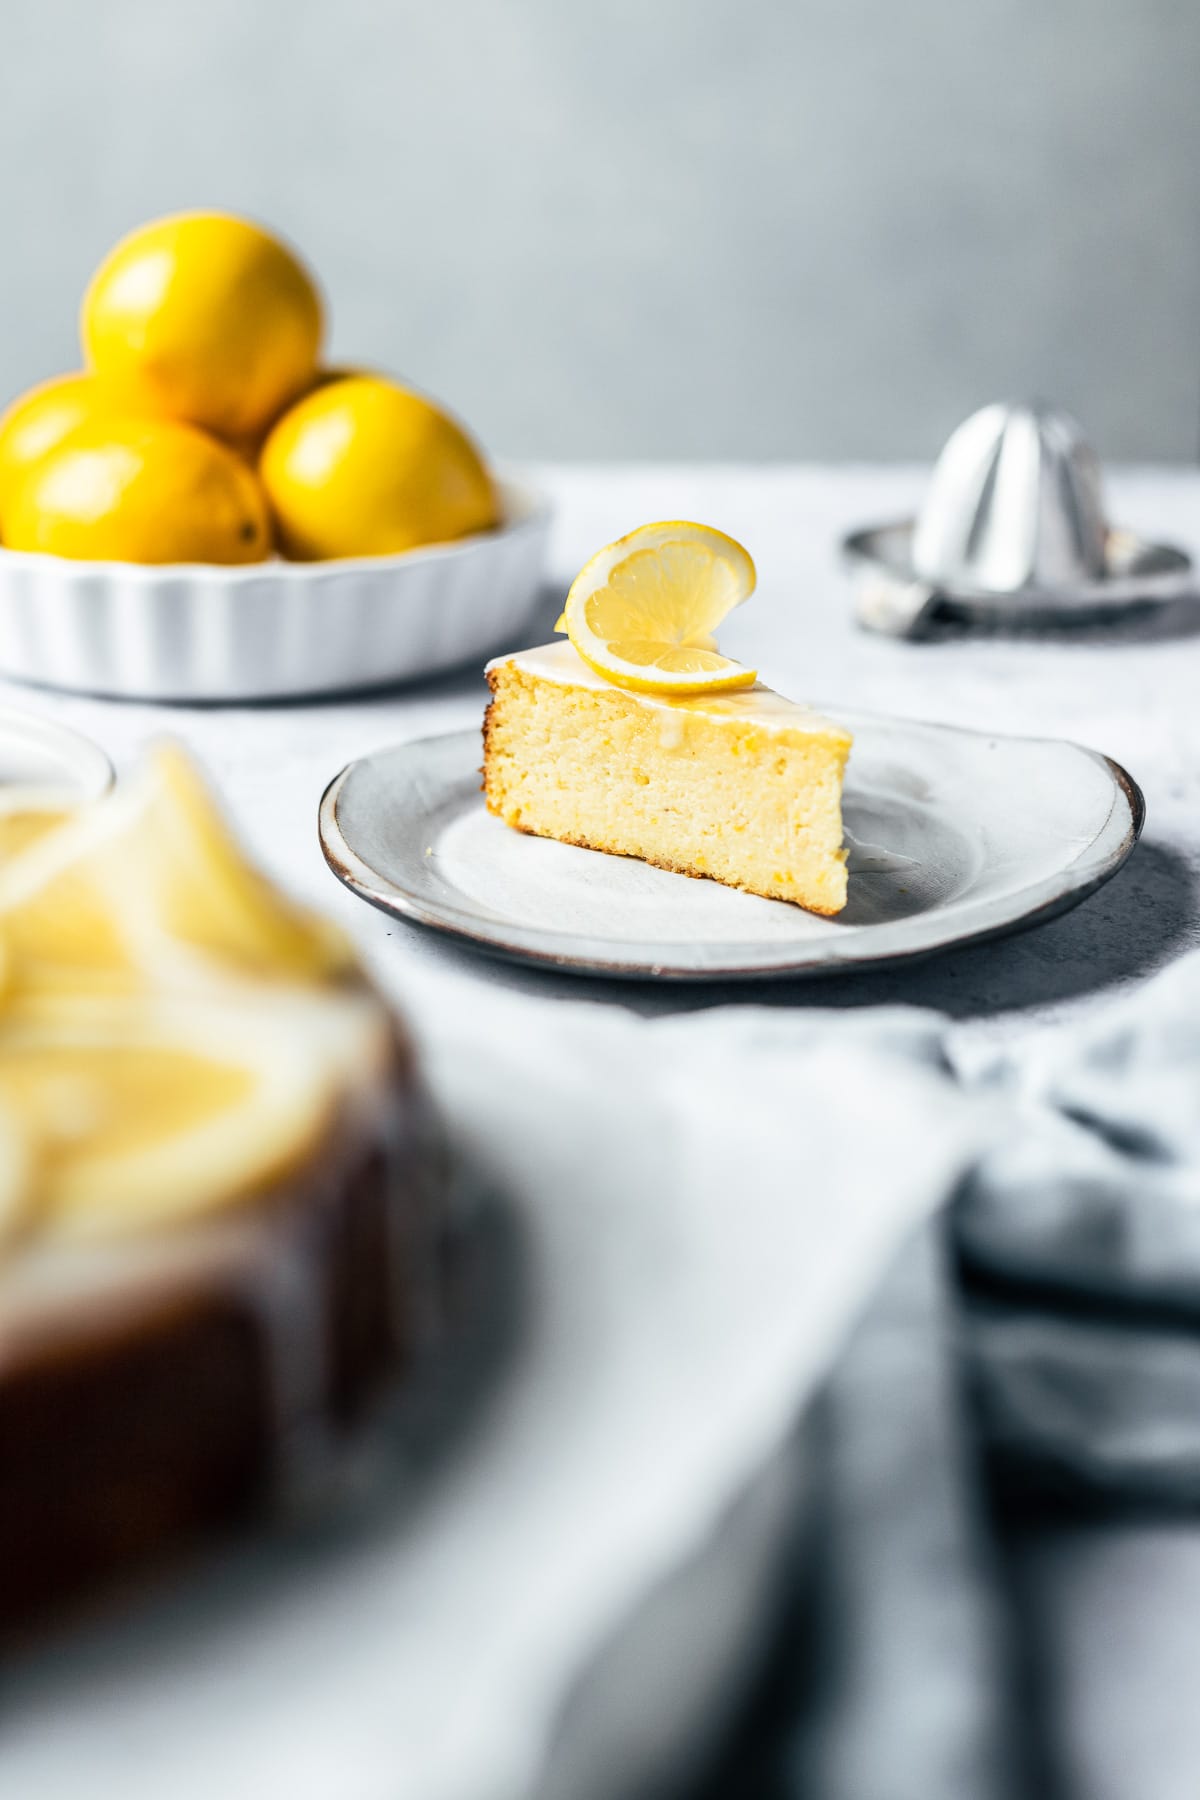 A front view of a slice of cake with a twisted lemon slice decoration on top, on a white ceramic plate. Lemons, a juicer, the rest of the cake, and a light blue napkin all surround the cake, slightly out of focus.